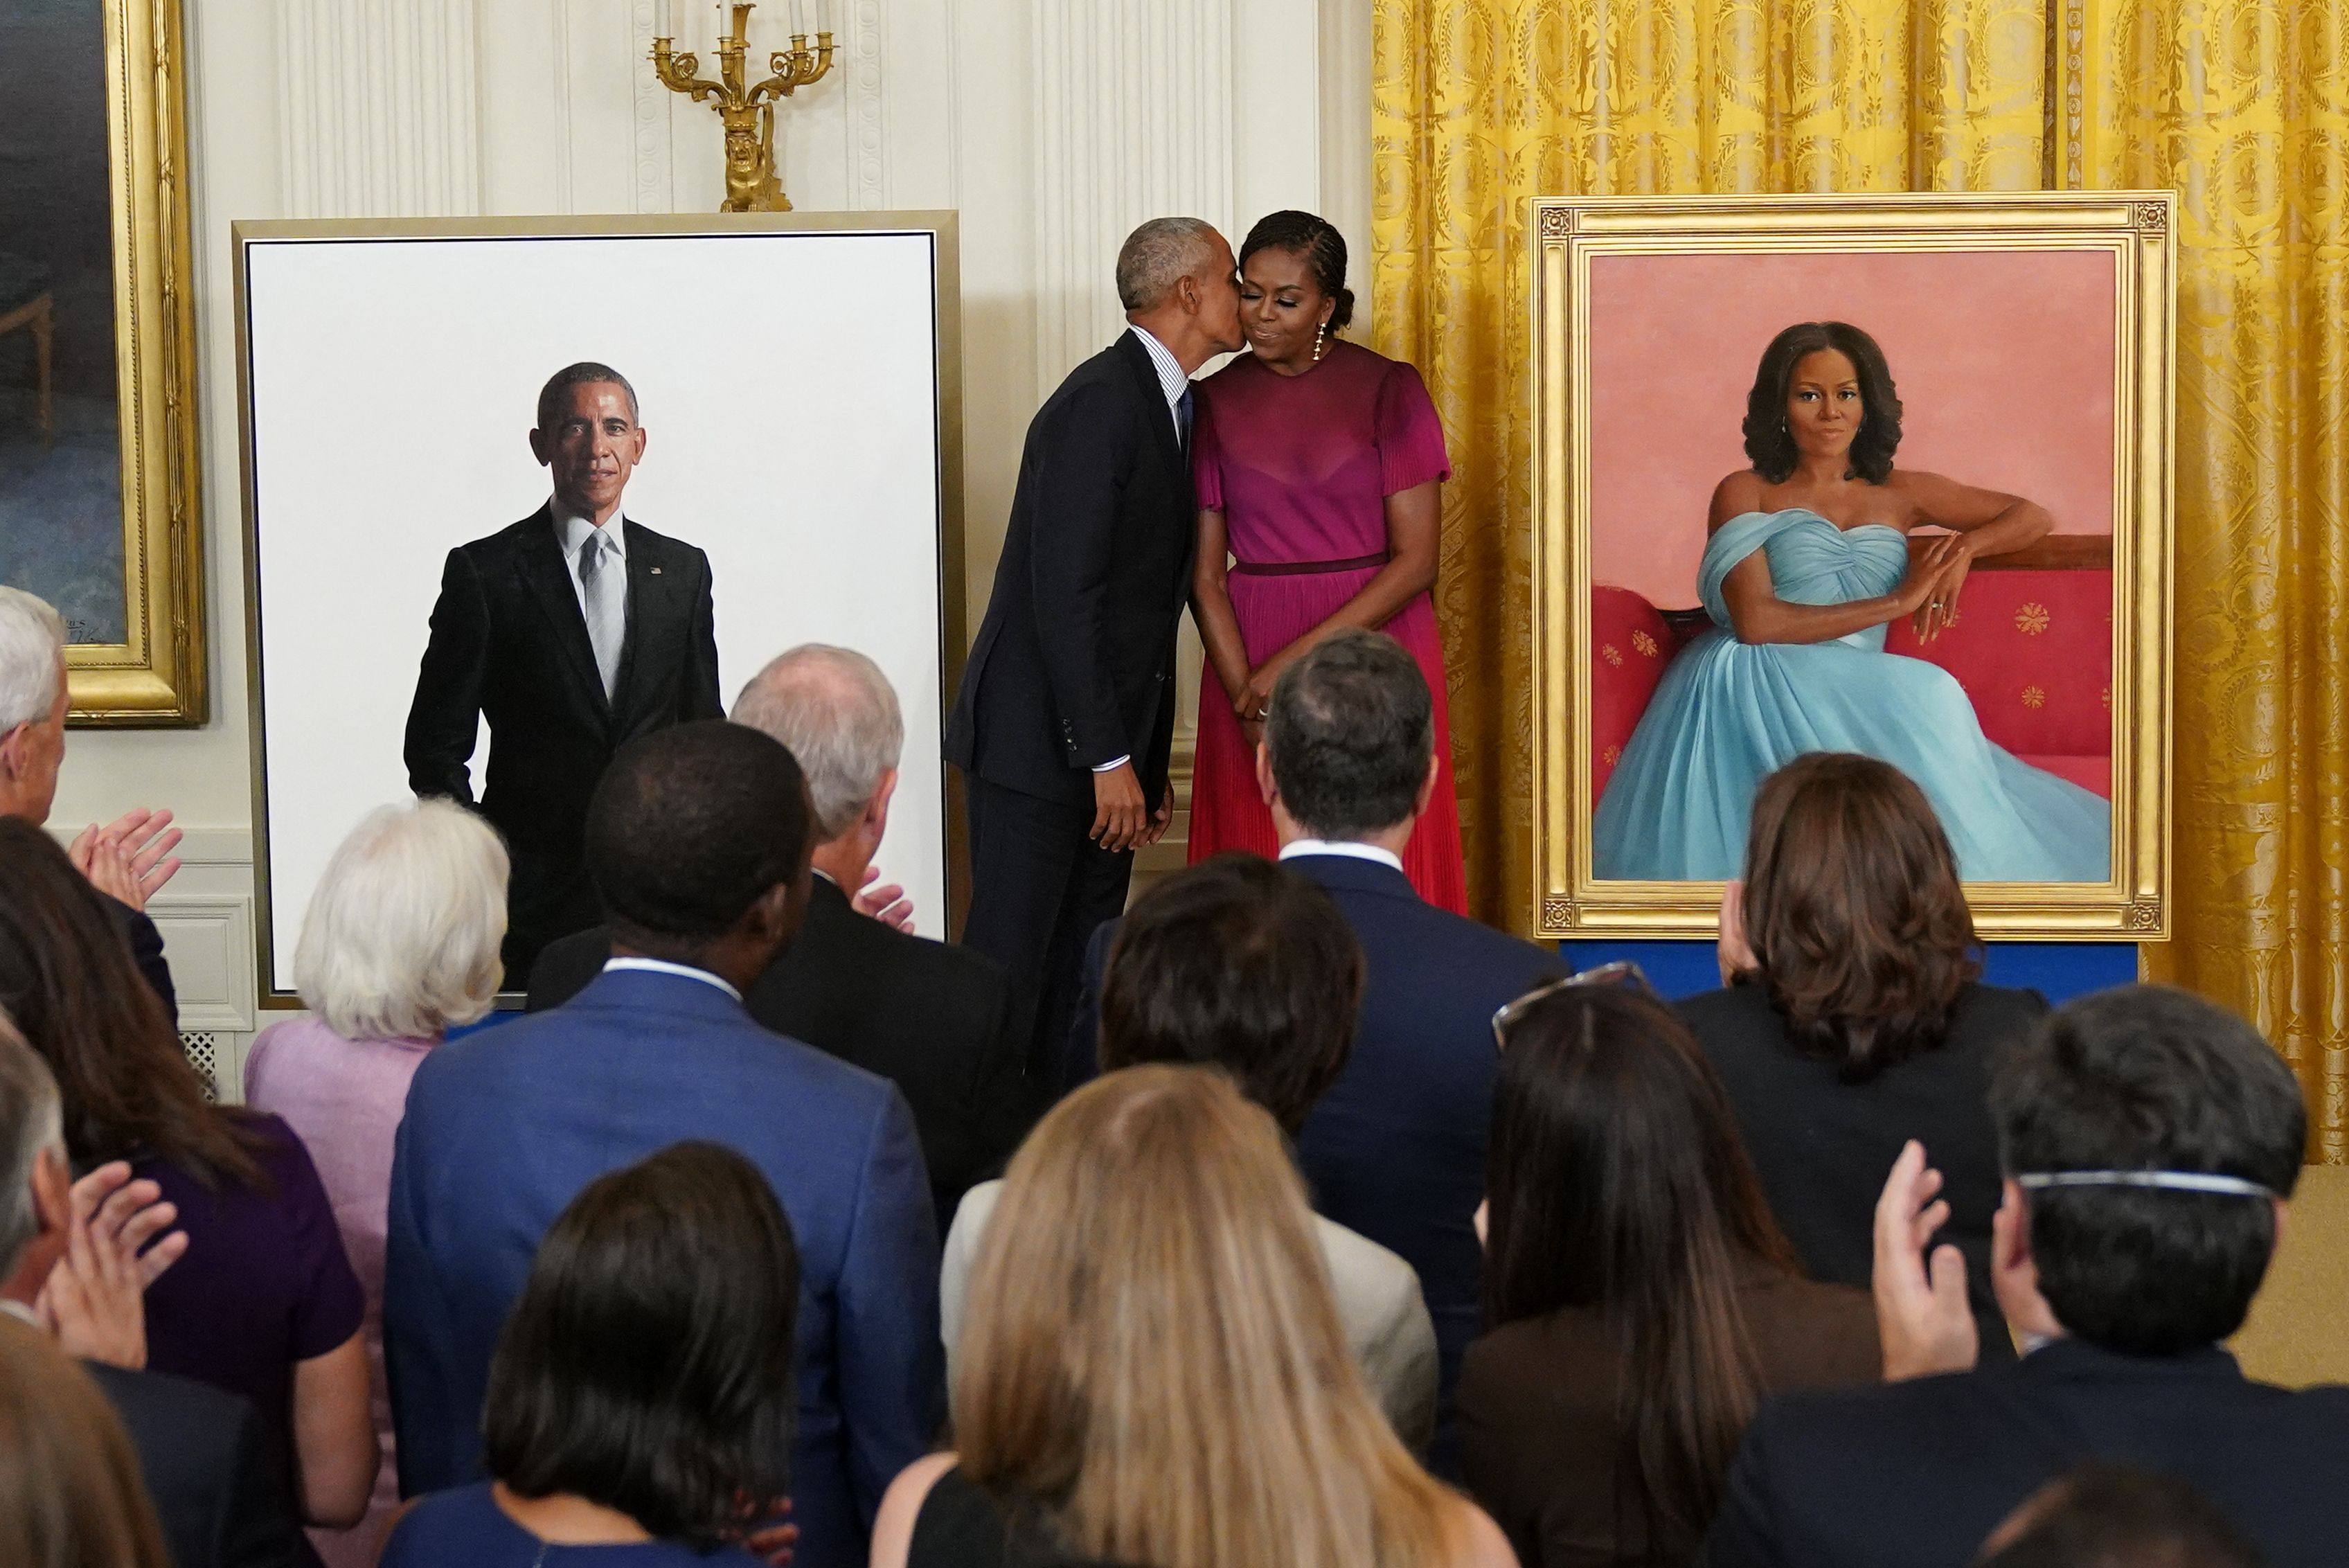 Former US president Barack Obama kisses his wife, Michelle Obama, during a ceremony to unveil their official White House portraits on Wednesday. Photo: AFP